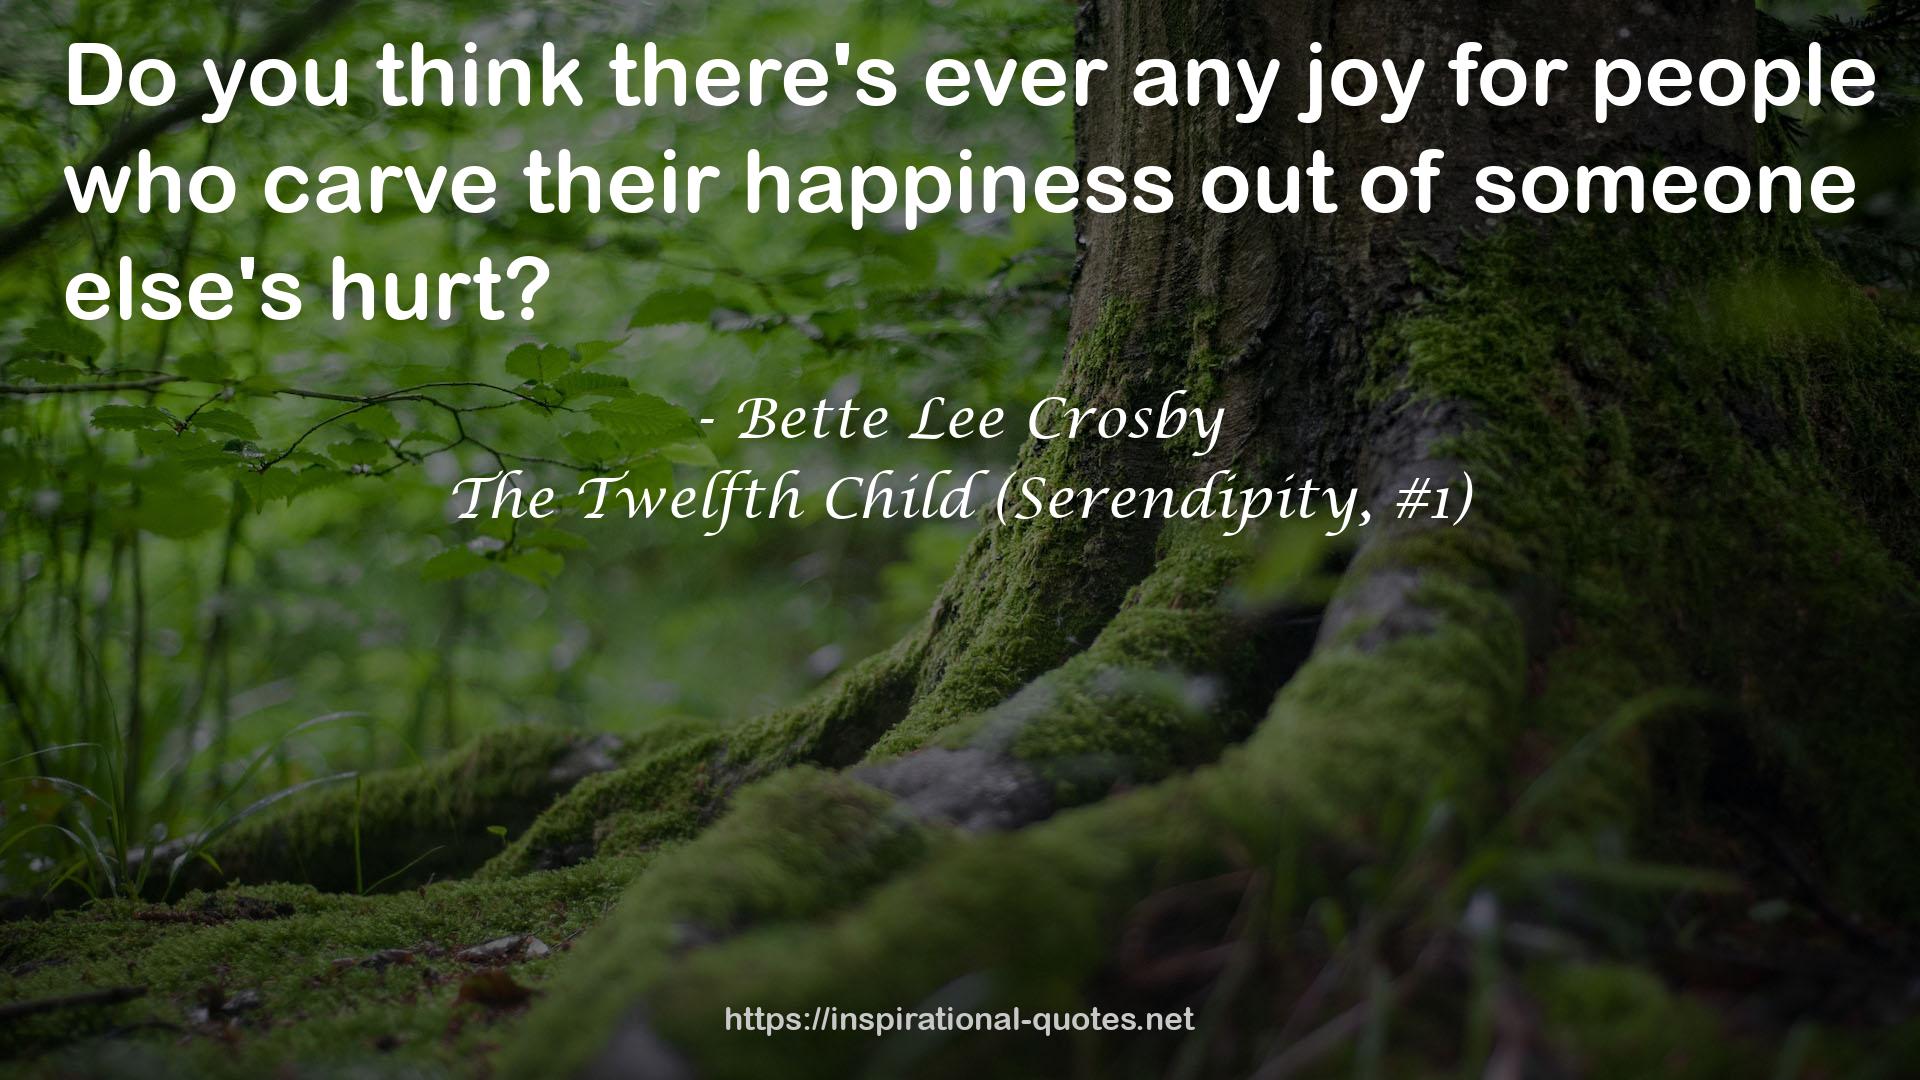 The Twelfth Child (Serendipity, #1) QUOTES